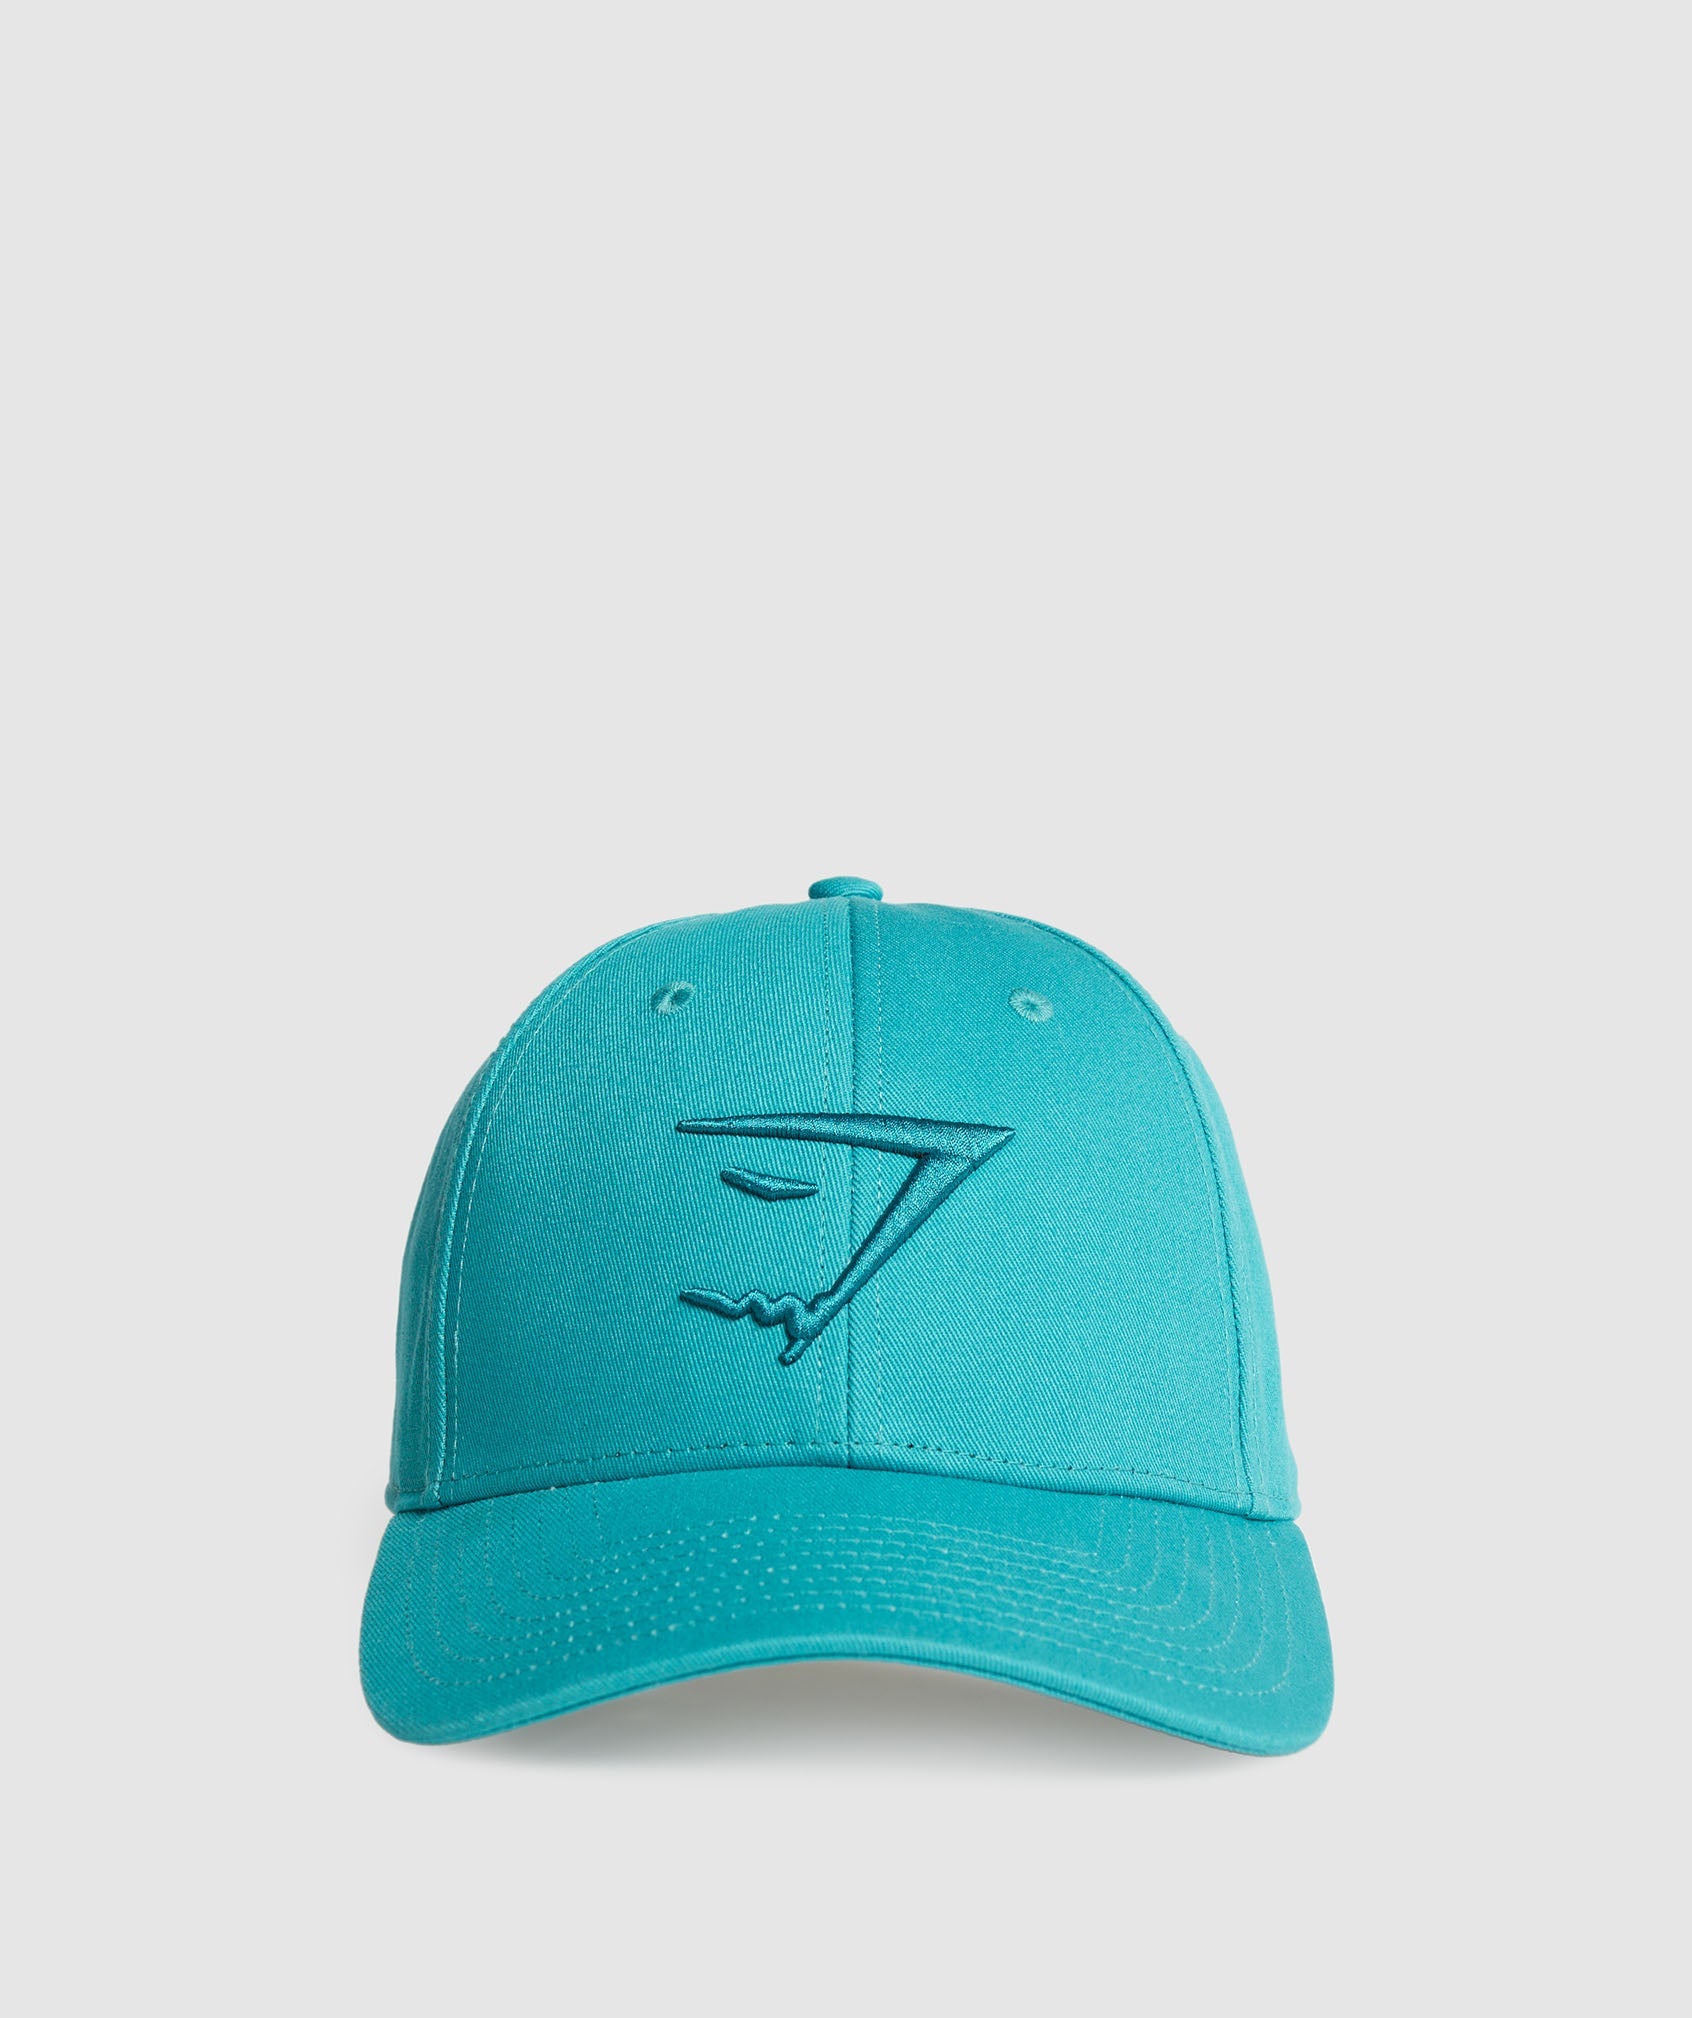 Sharkhead Cap in Bondi Teal is out of stock